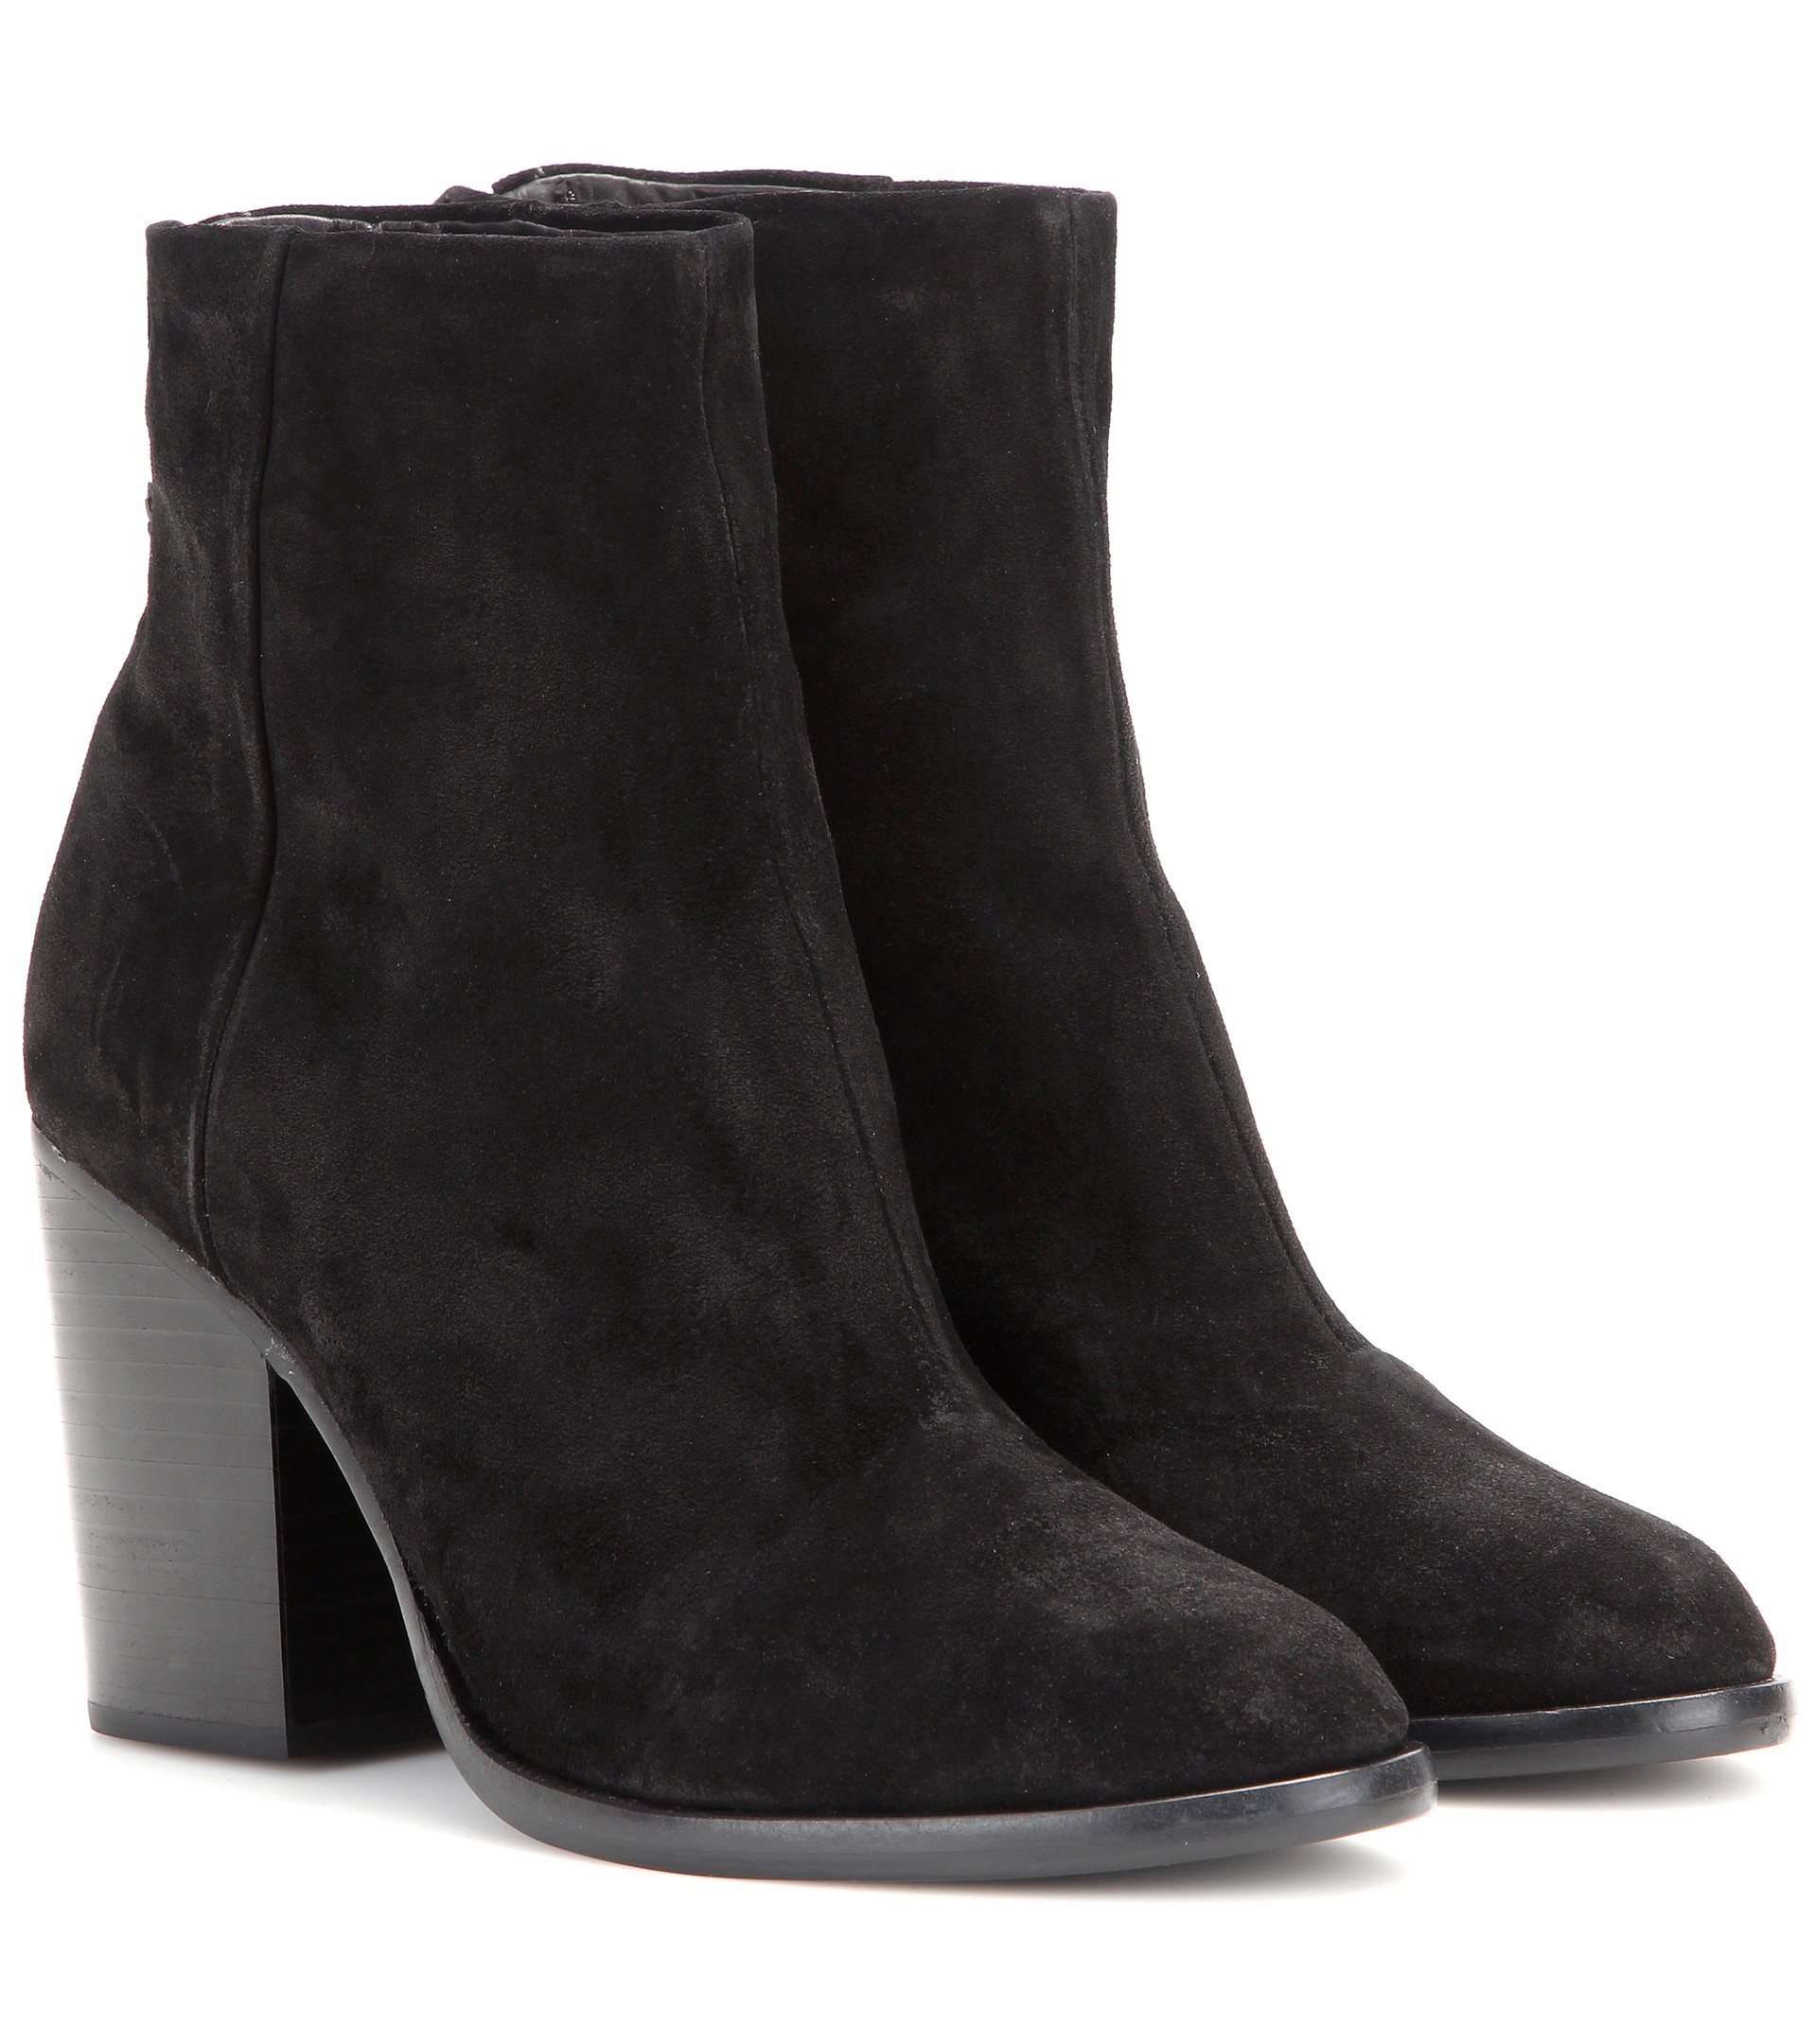 Rag & Bone Ashby Suede Ankle Boots in Black Suede (Black) - Lyst